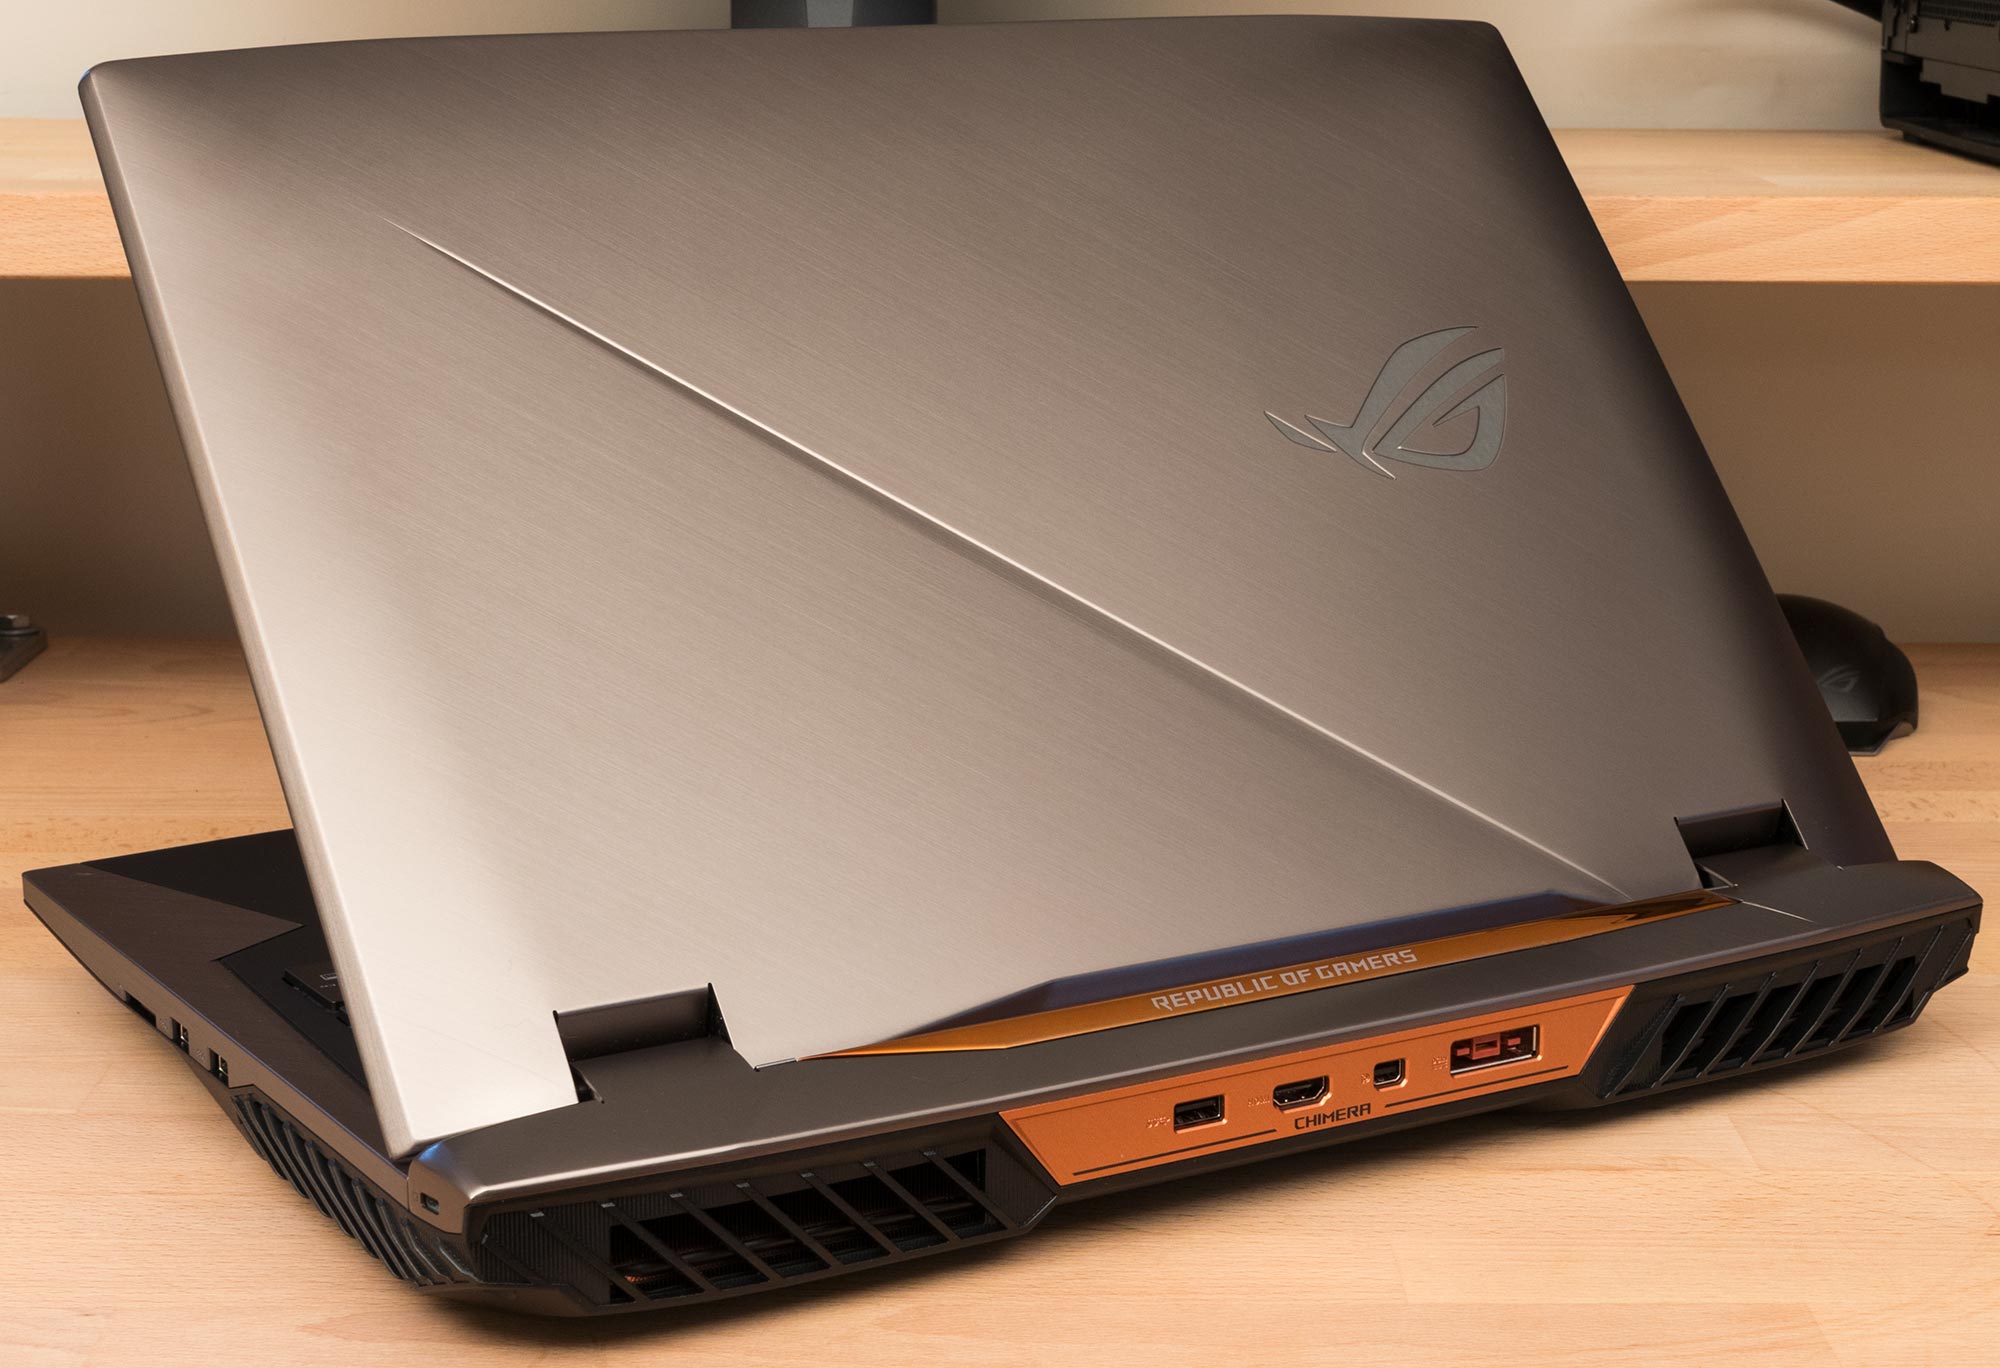 A Peek Inside The Insanely Powerful Rog G703 Gaming Laptop